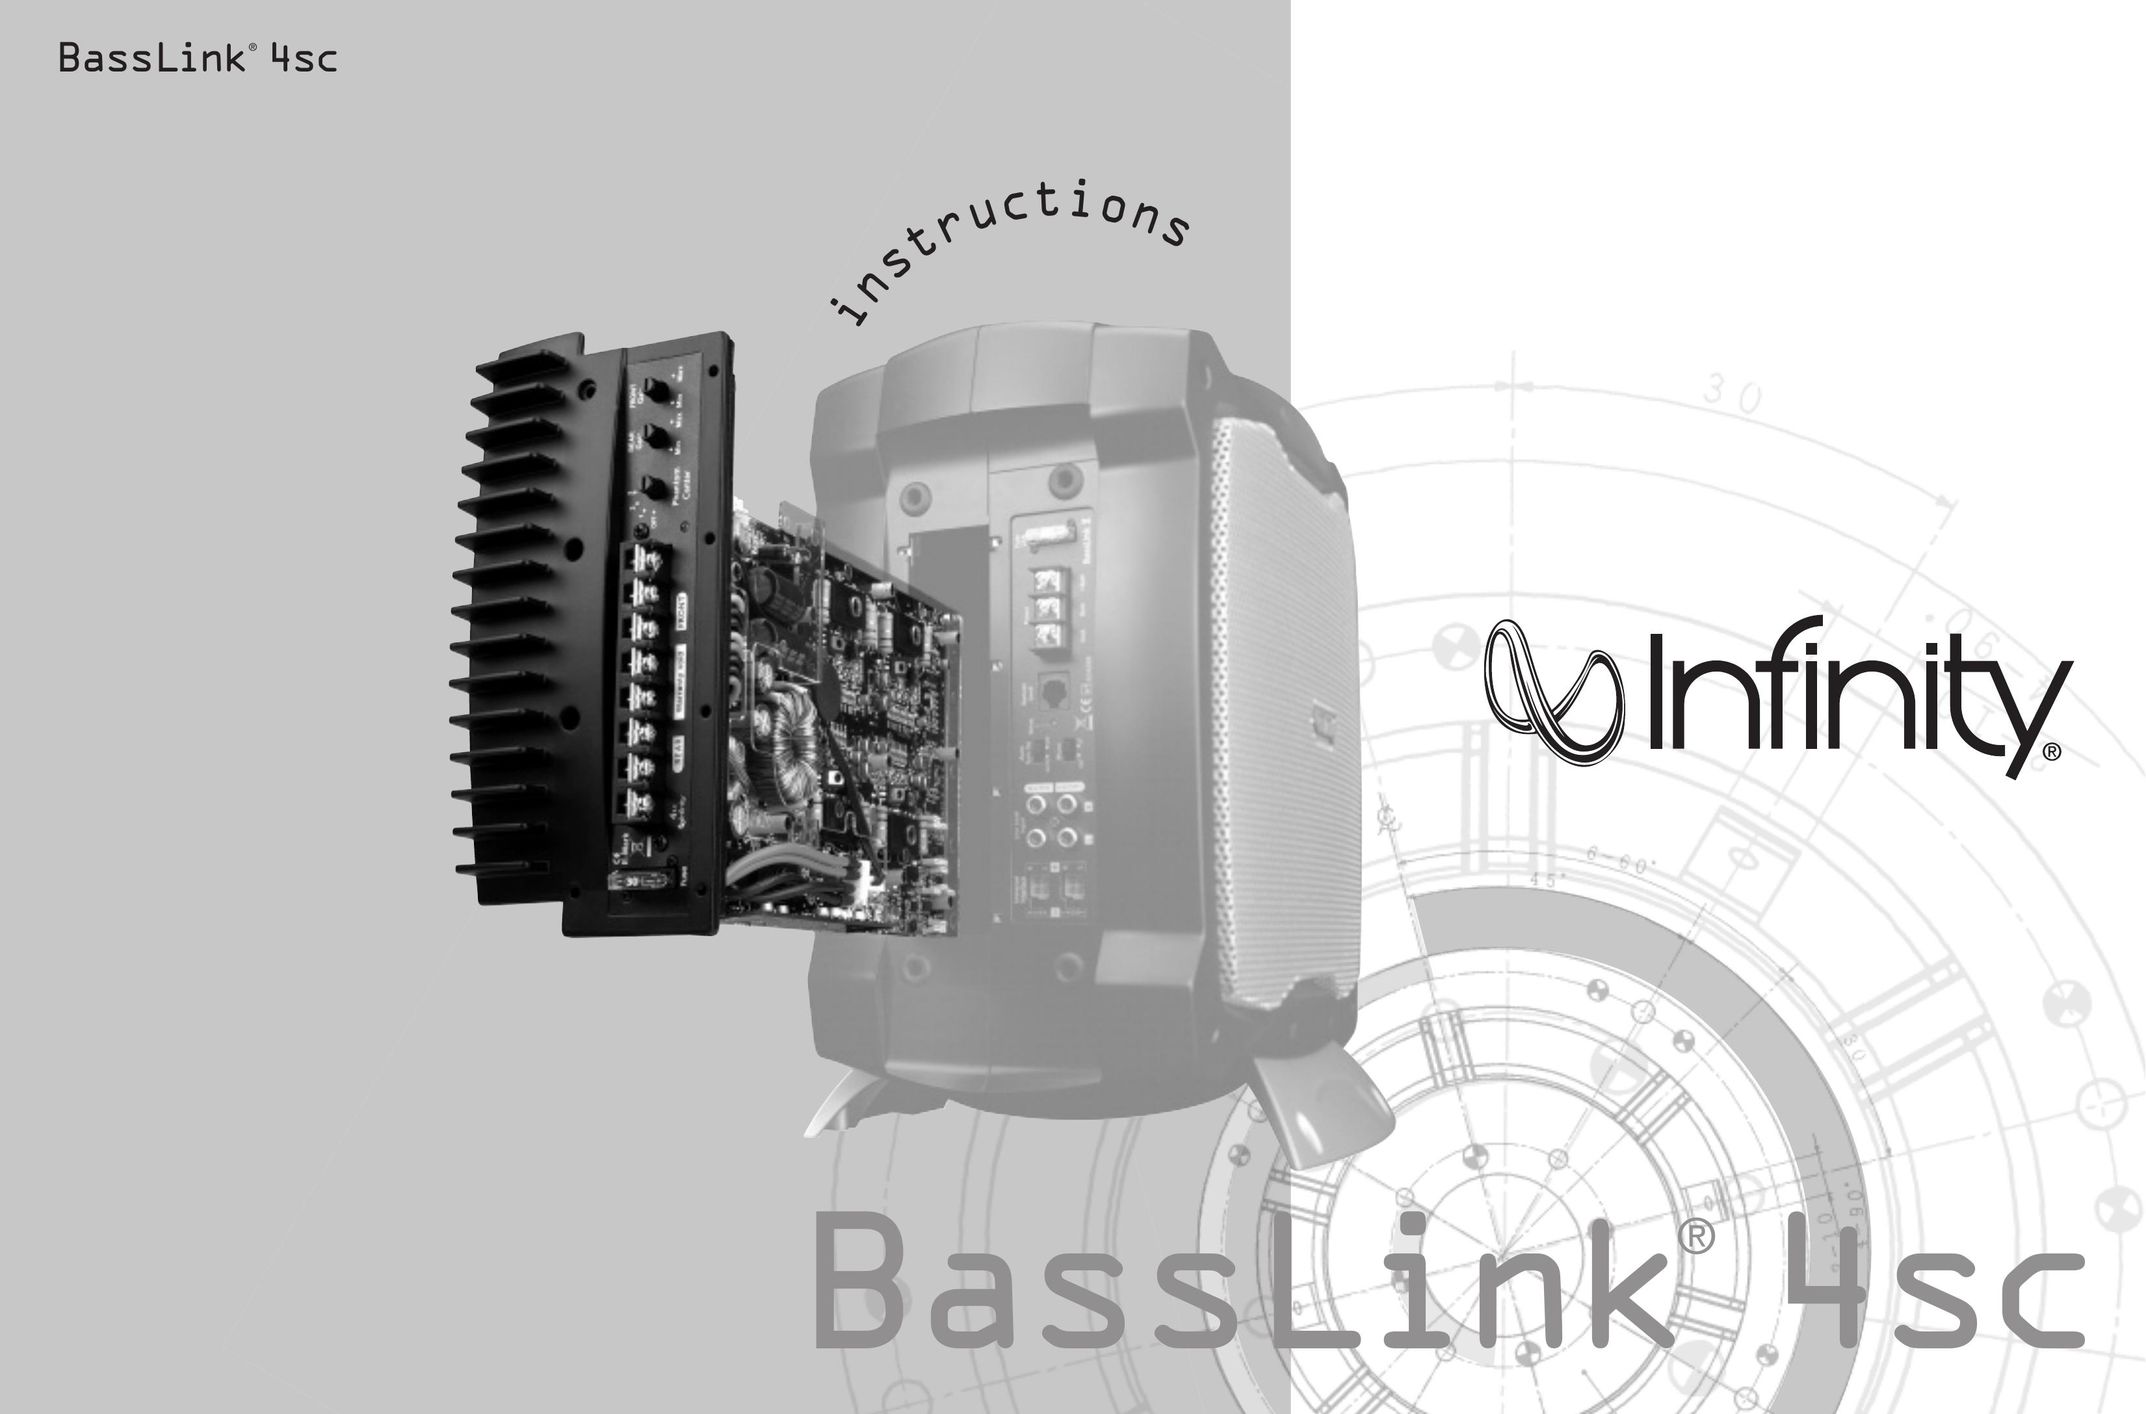 Infinity 4SC Stereo Amplifier User Manual